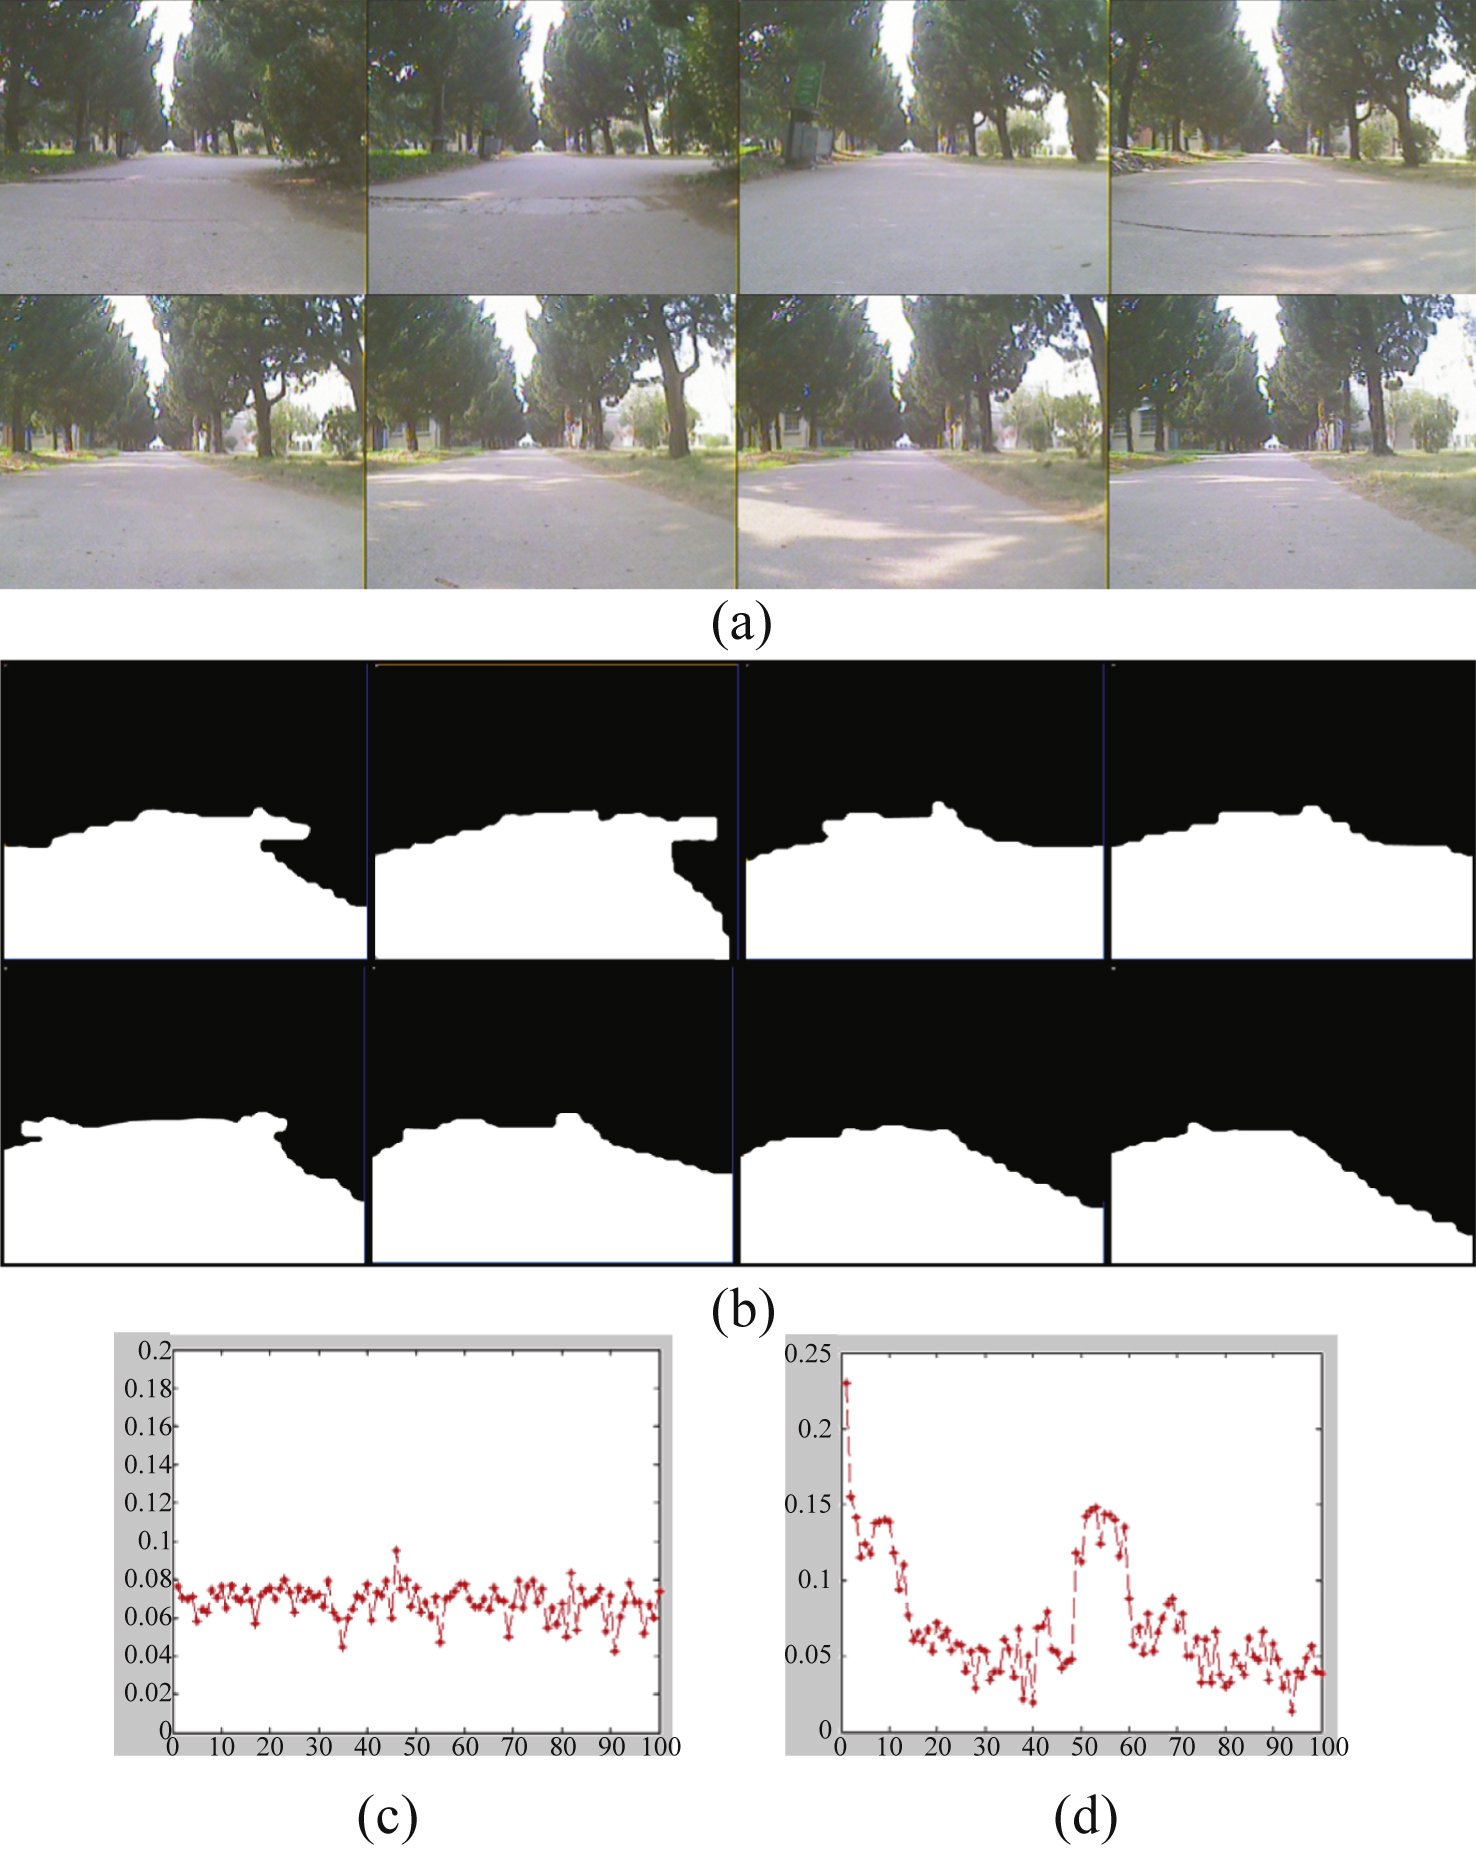 Results of continuous frames, (a) original scenes, (b) results of road detection, (c) error rate of FSVM, (d) error rate of SVM.